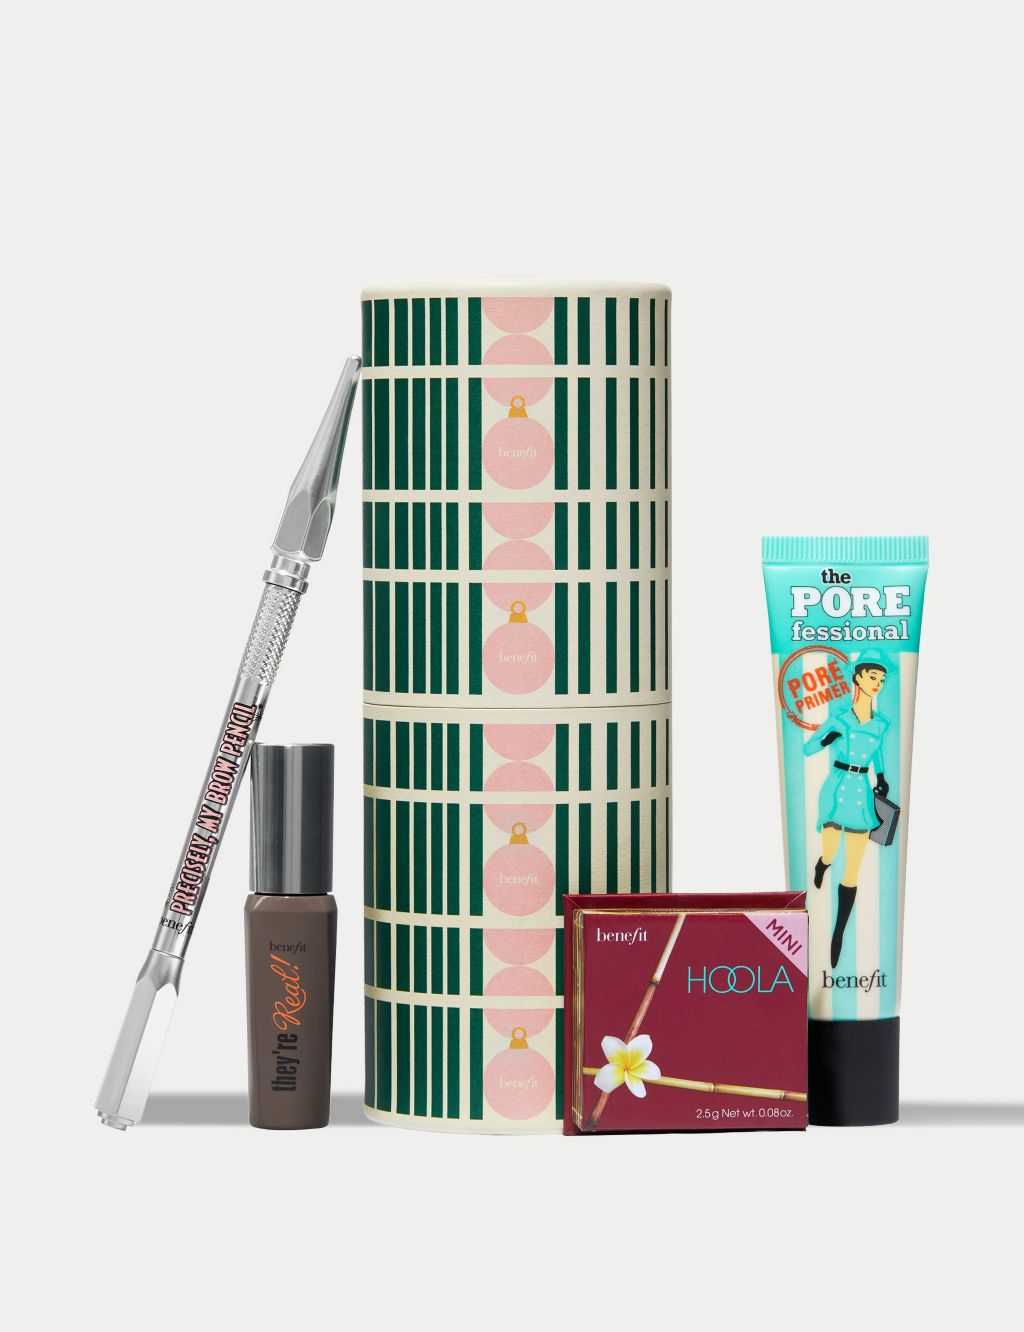 Giftin Goodies They're Real Mascara, Hoola Bronzer, Porefessional Primer & Precisely My Brow Pencil Gift Set (Worth £84.50) 3 of 7